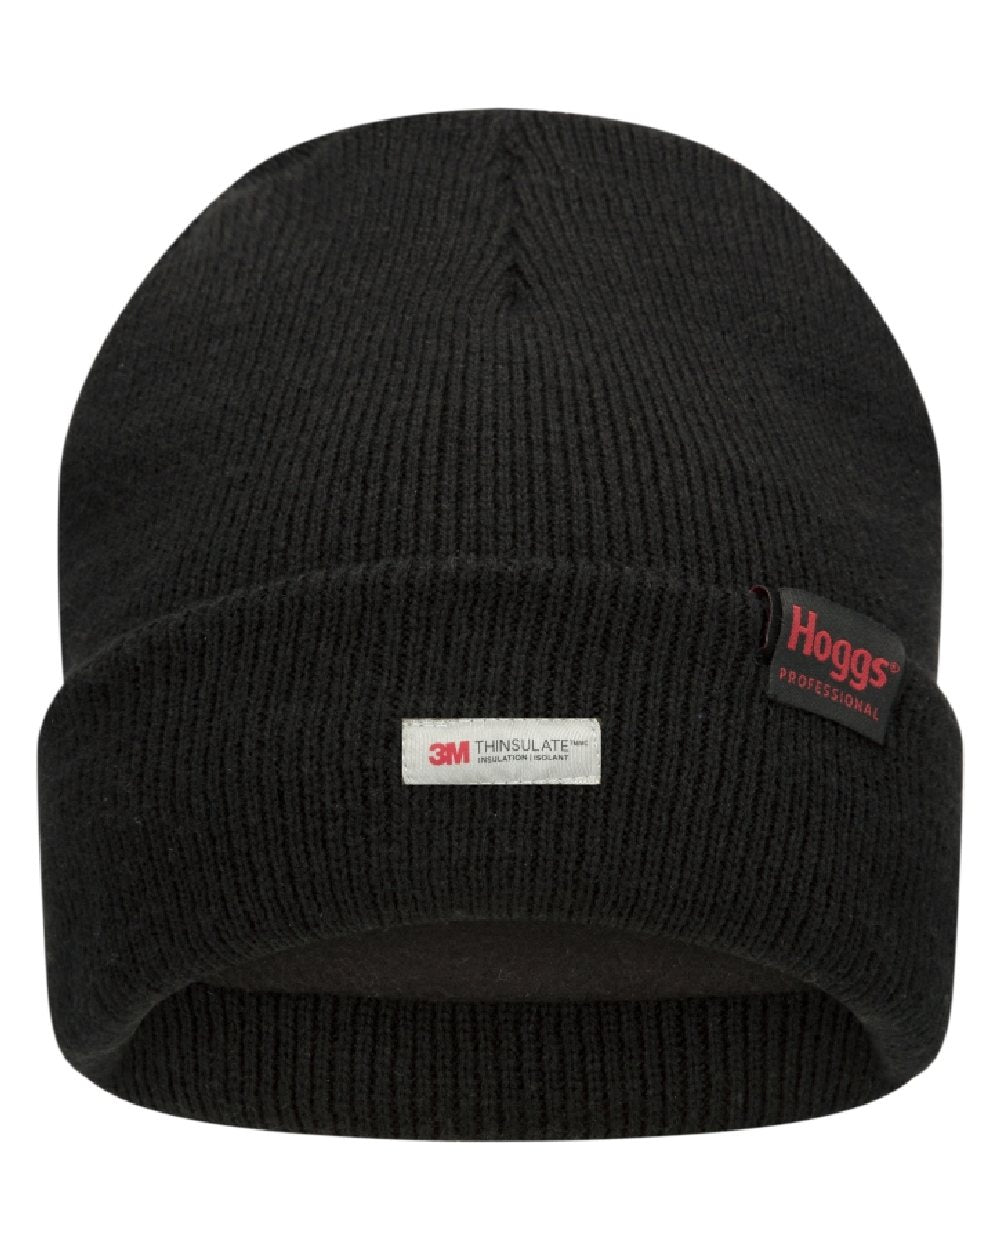 Black coloured Hoggs of Fife Knitted Thinsulate Waterproof Beanie on white background 